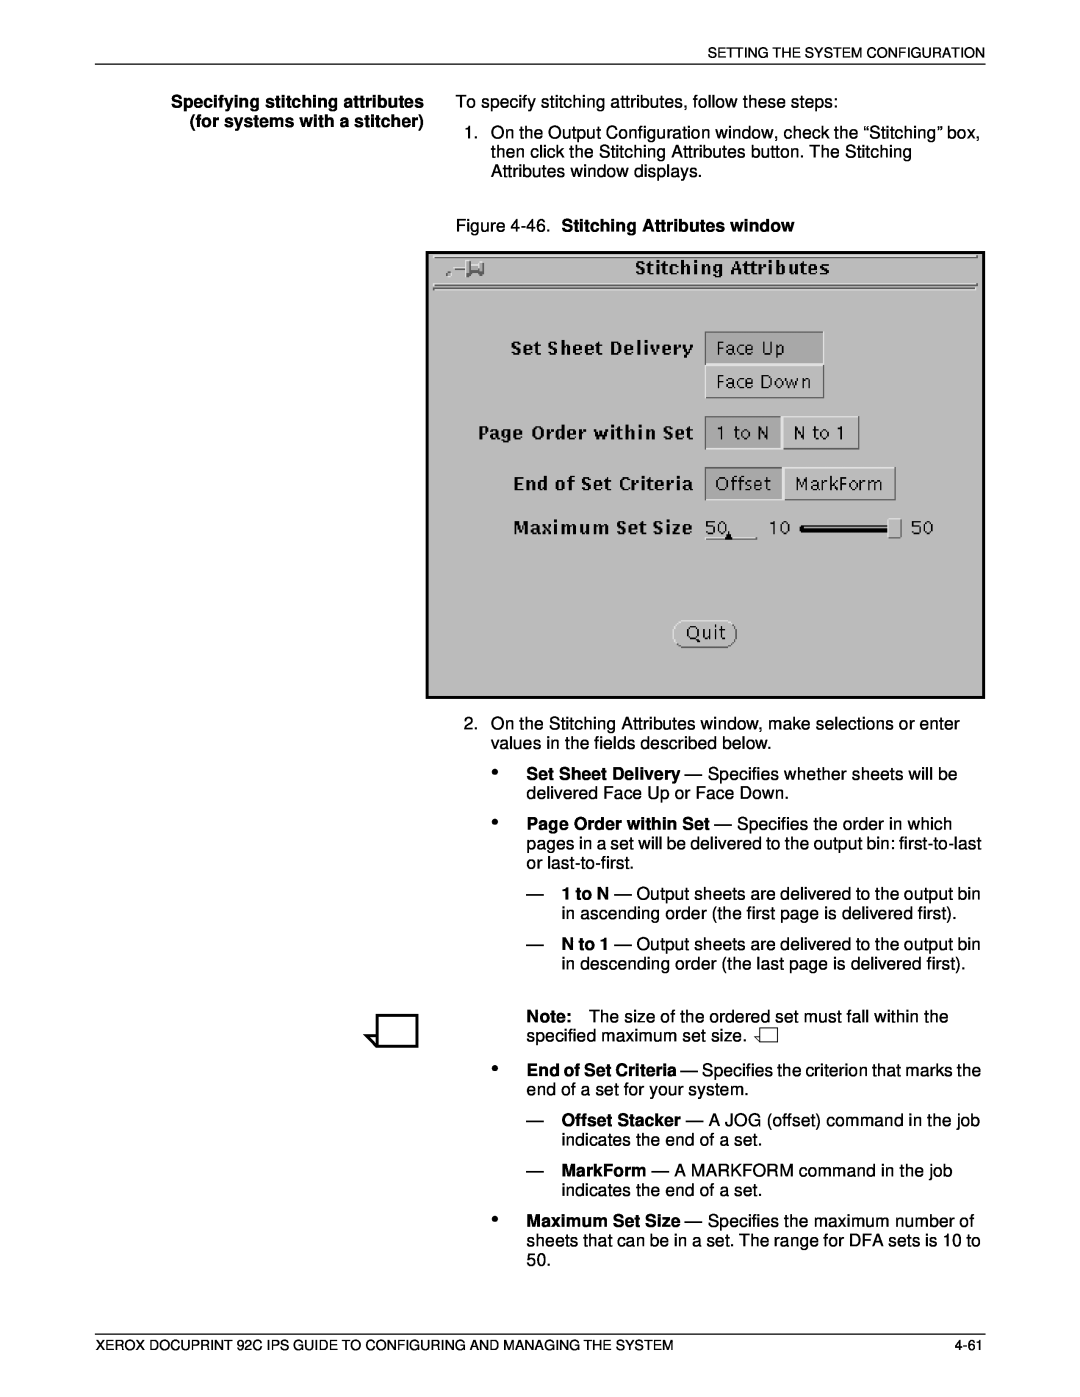 Xerox 92C IPS manual for systems with a stitcher, 46. Stitching Attributes window 